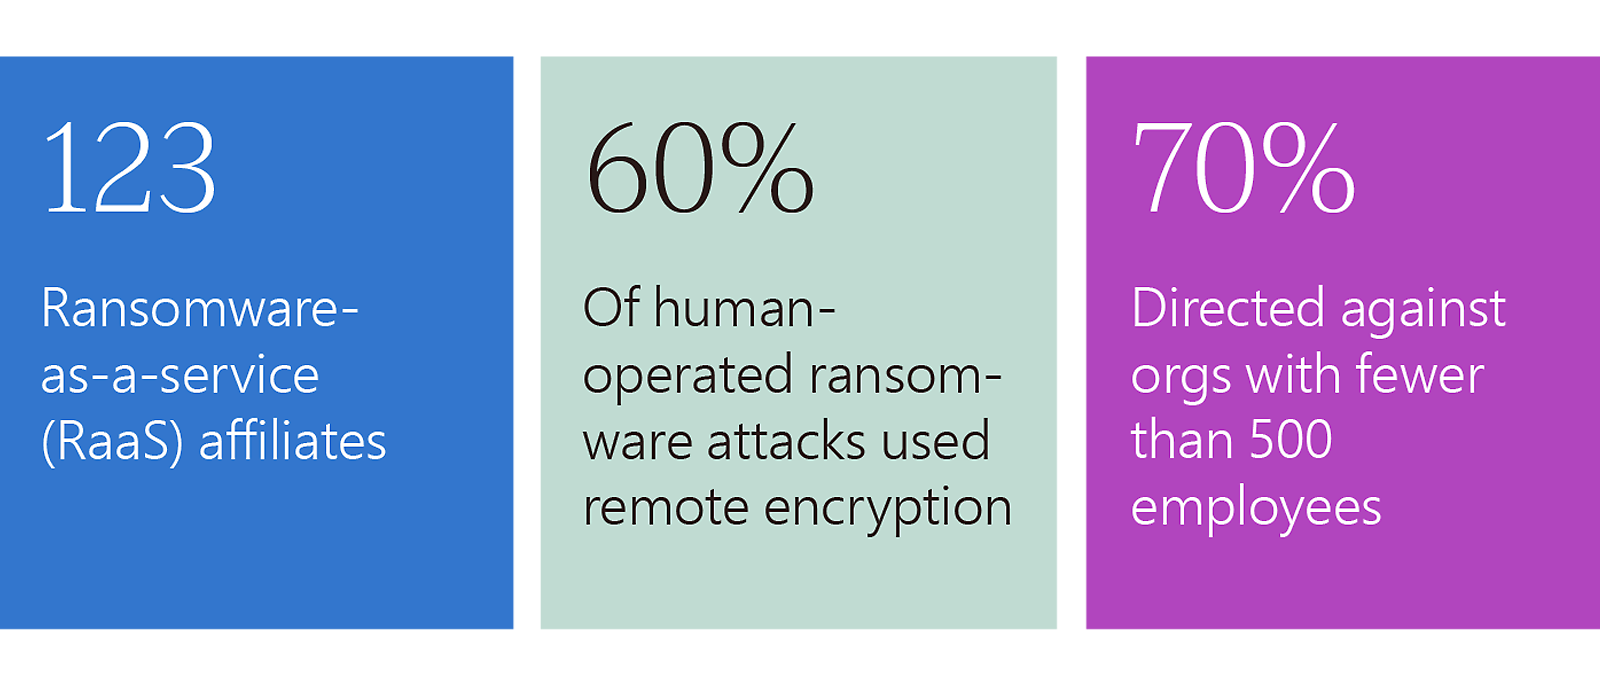 Ransomware stats: 123 RaaS affiliates, 60% use remote encryption, 70% target <500 employees